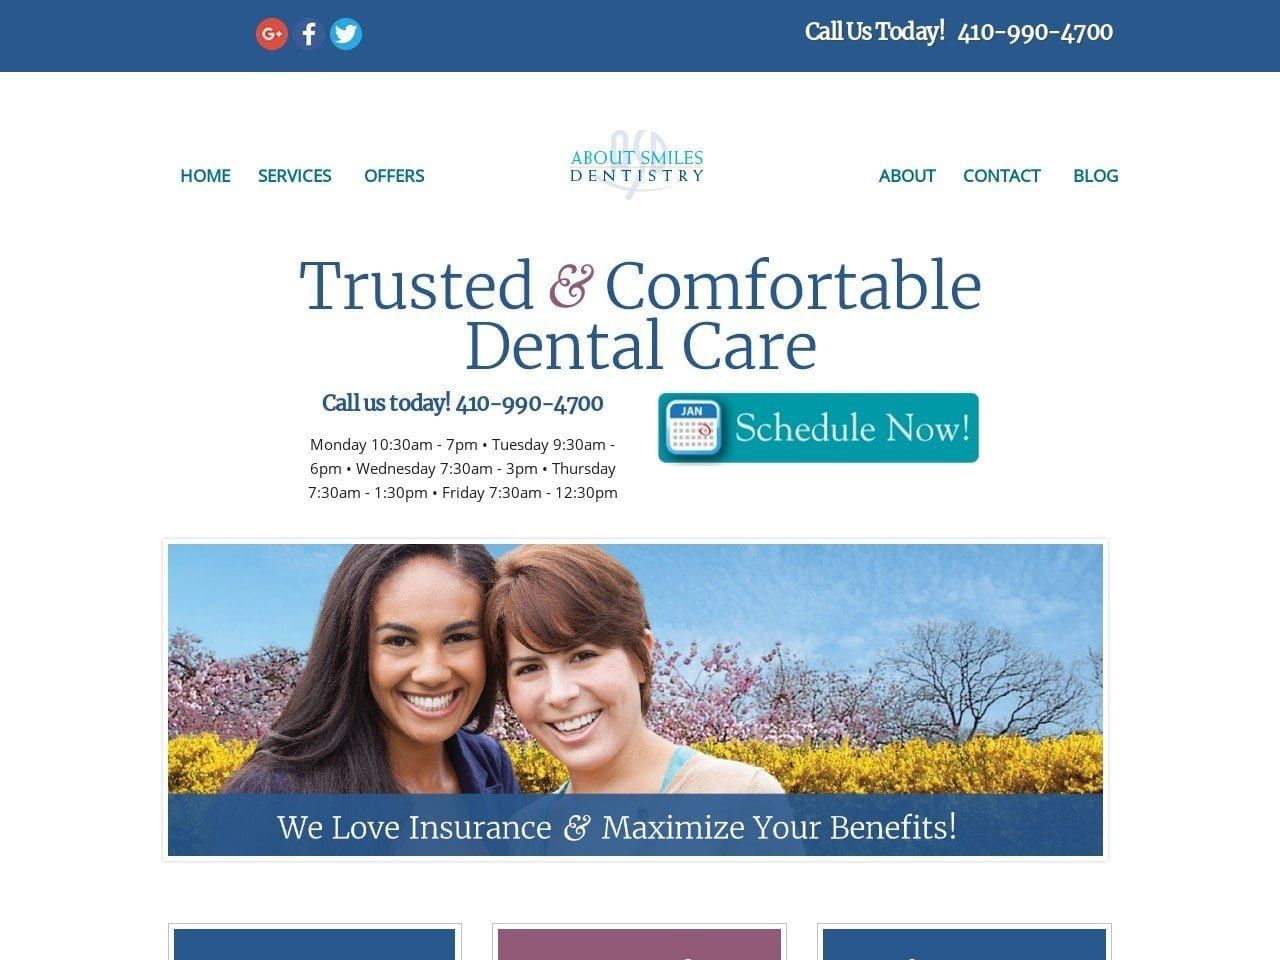 About Smiles Dentist Website Screenshot from aboutsmilesdentistry.com